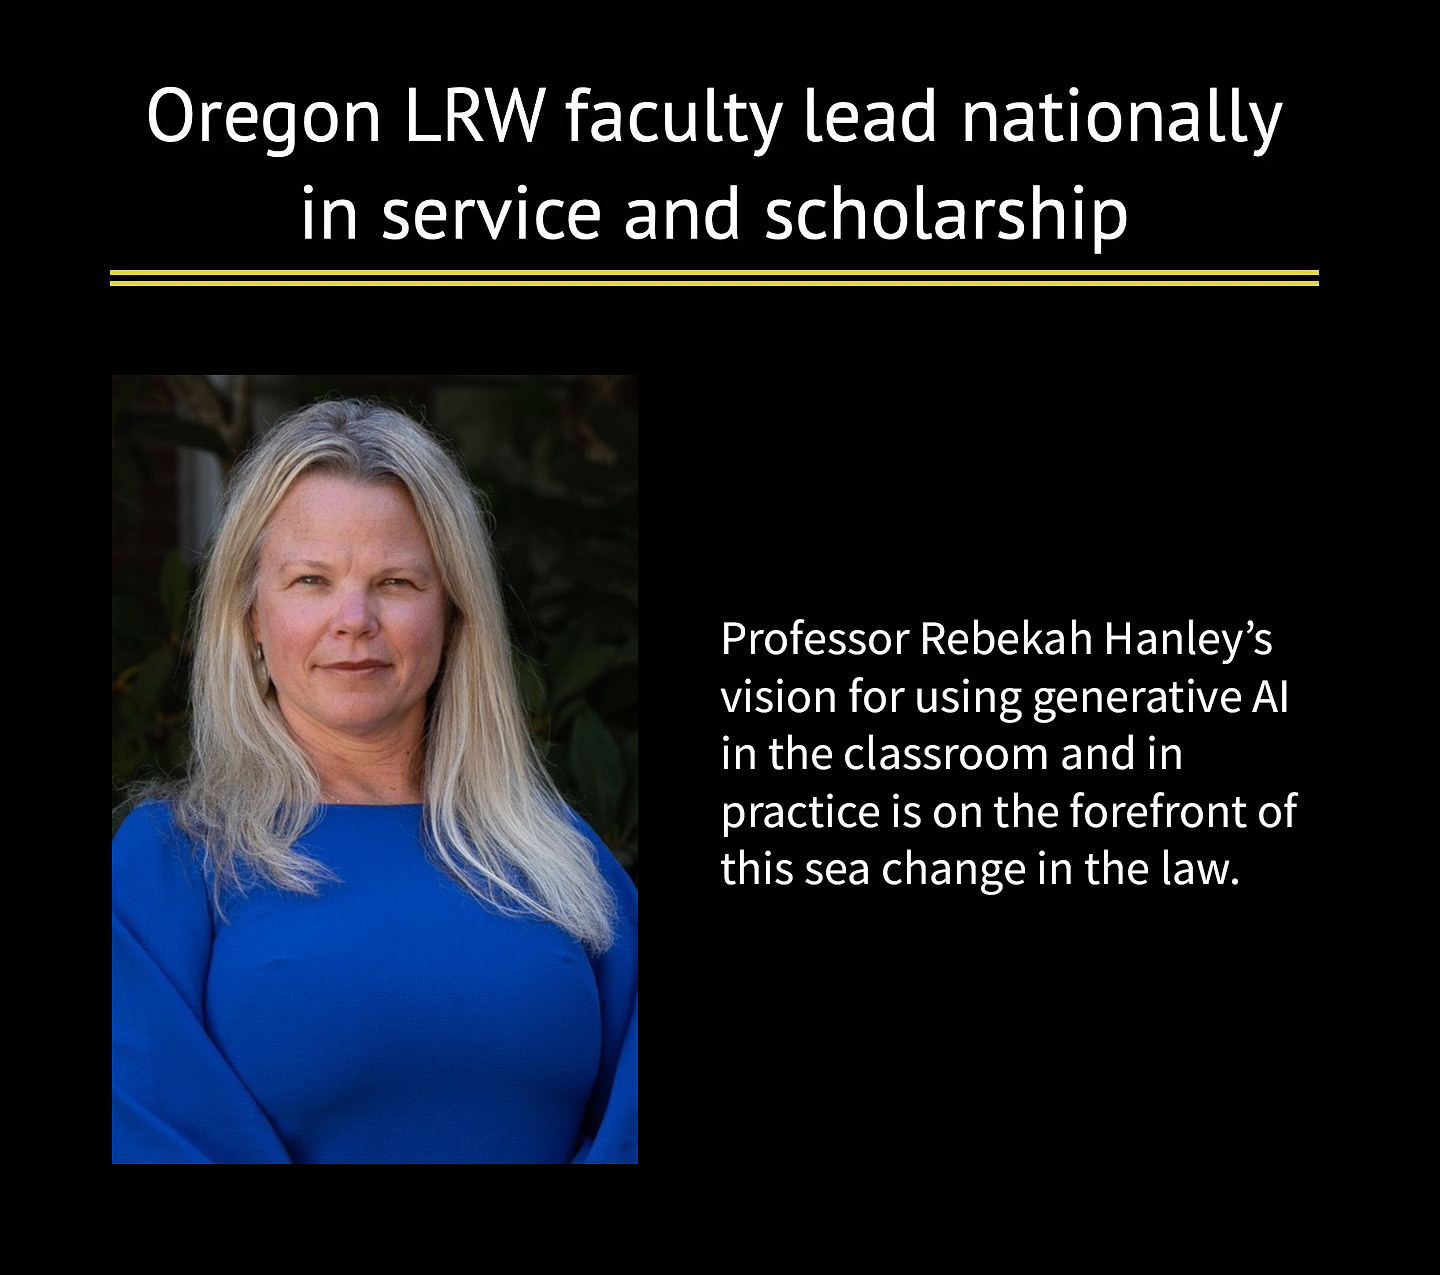 Oregon LRW faculty lead nationally in service and scholarship. Professor Rebekah Hanley's vision for using generative AI in the classroom and in practice is on the forefront of this sea change in the law. There is a photo of Rebekah Hanley in a blue dress.